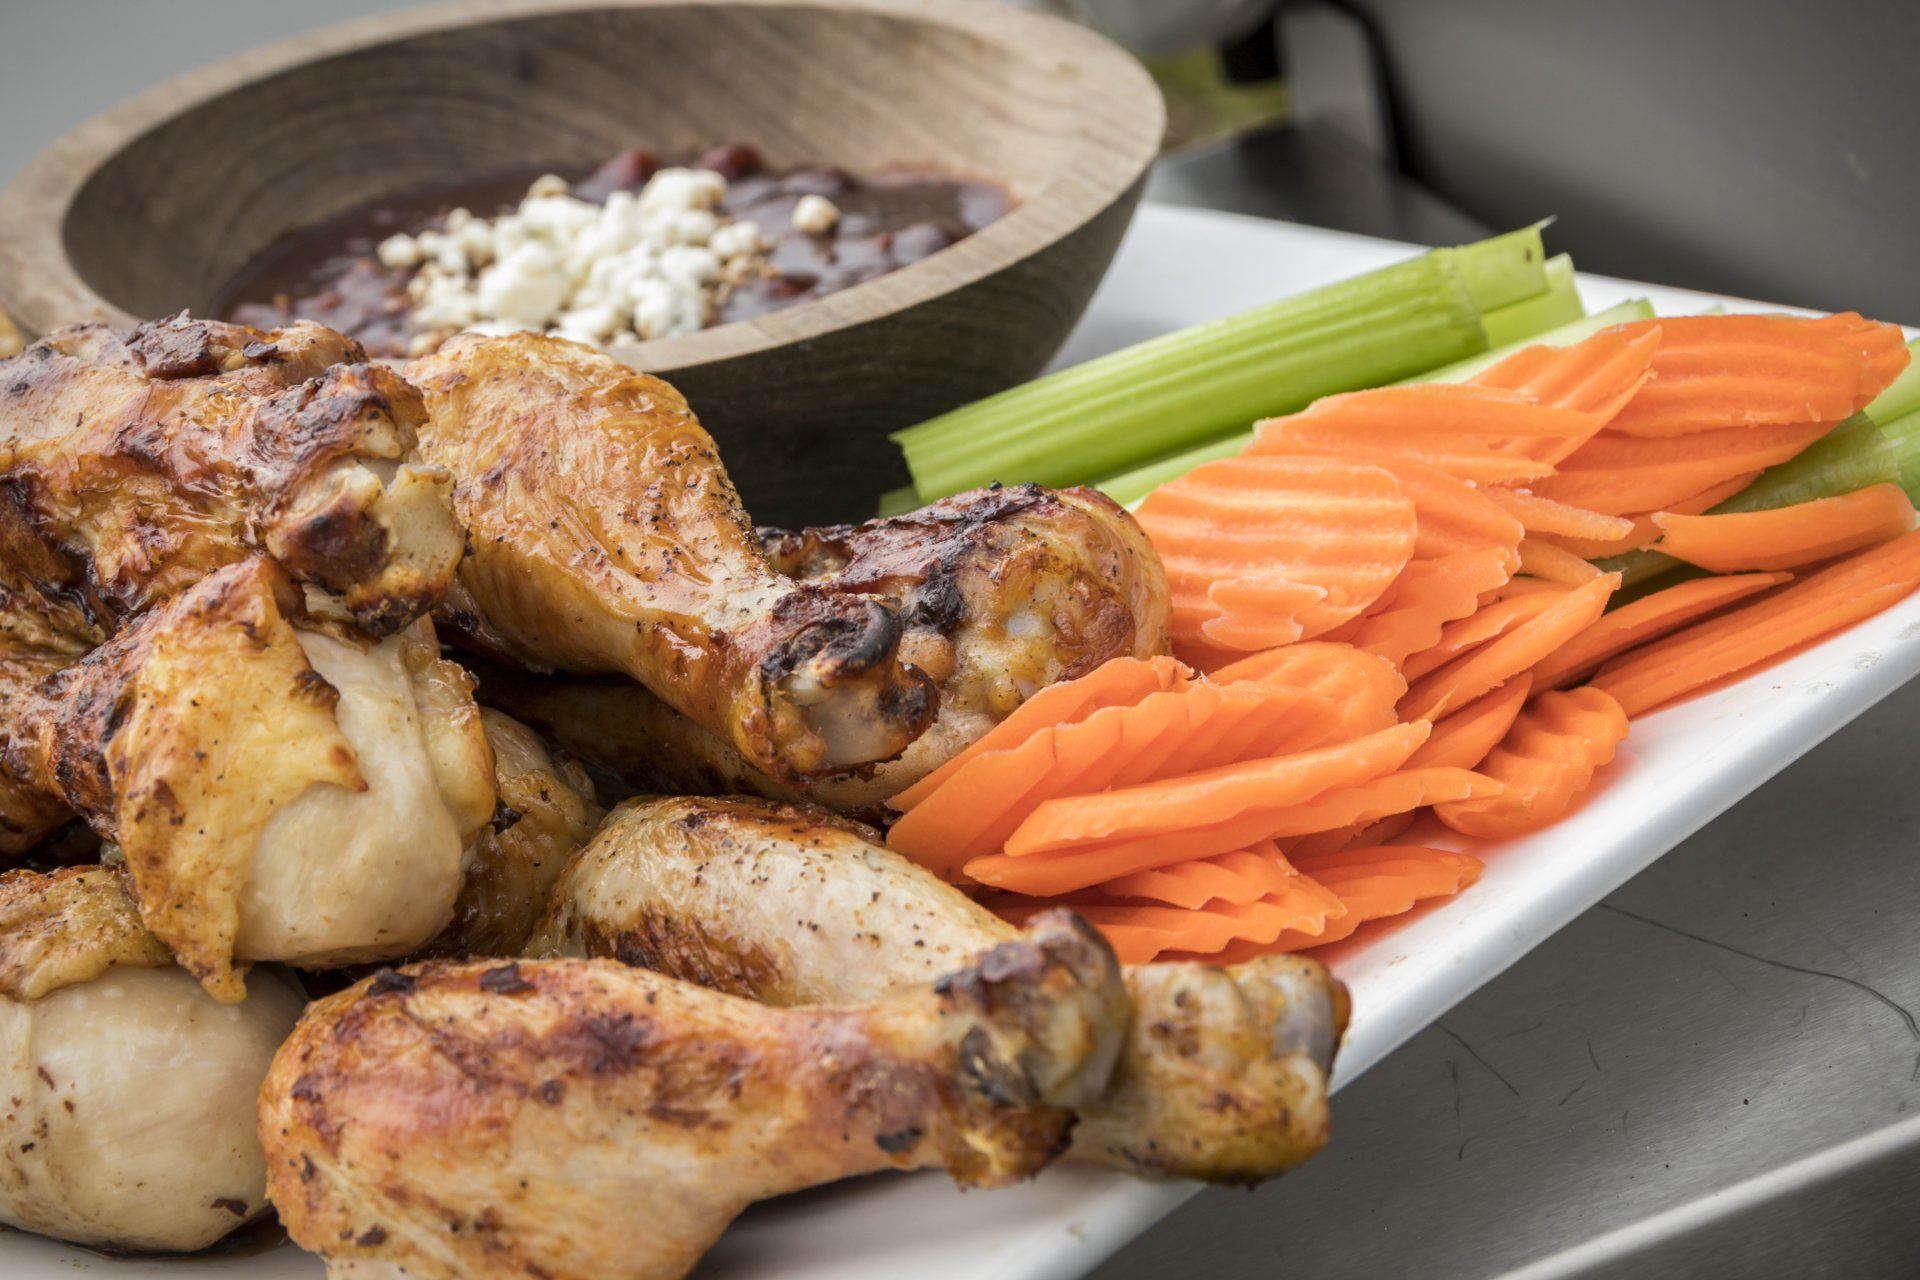 Jack Daniel’s Grilled Spicy Chicken Drumsticks with bowl of blue cheese dressing, carrots and celery